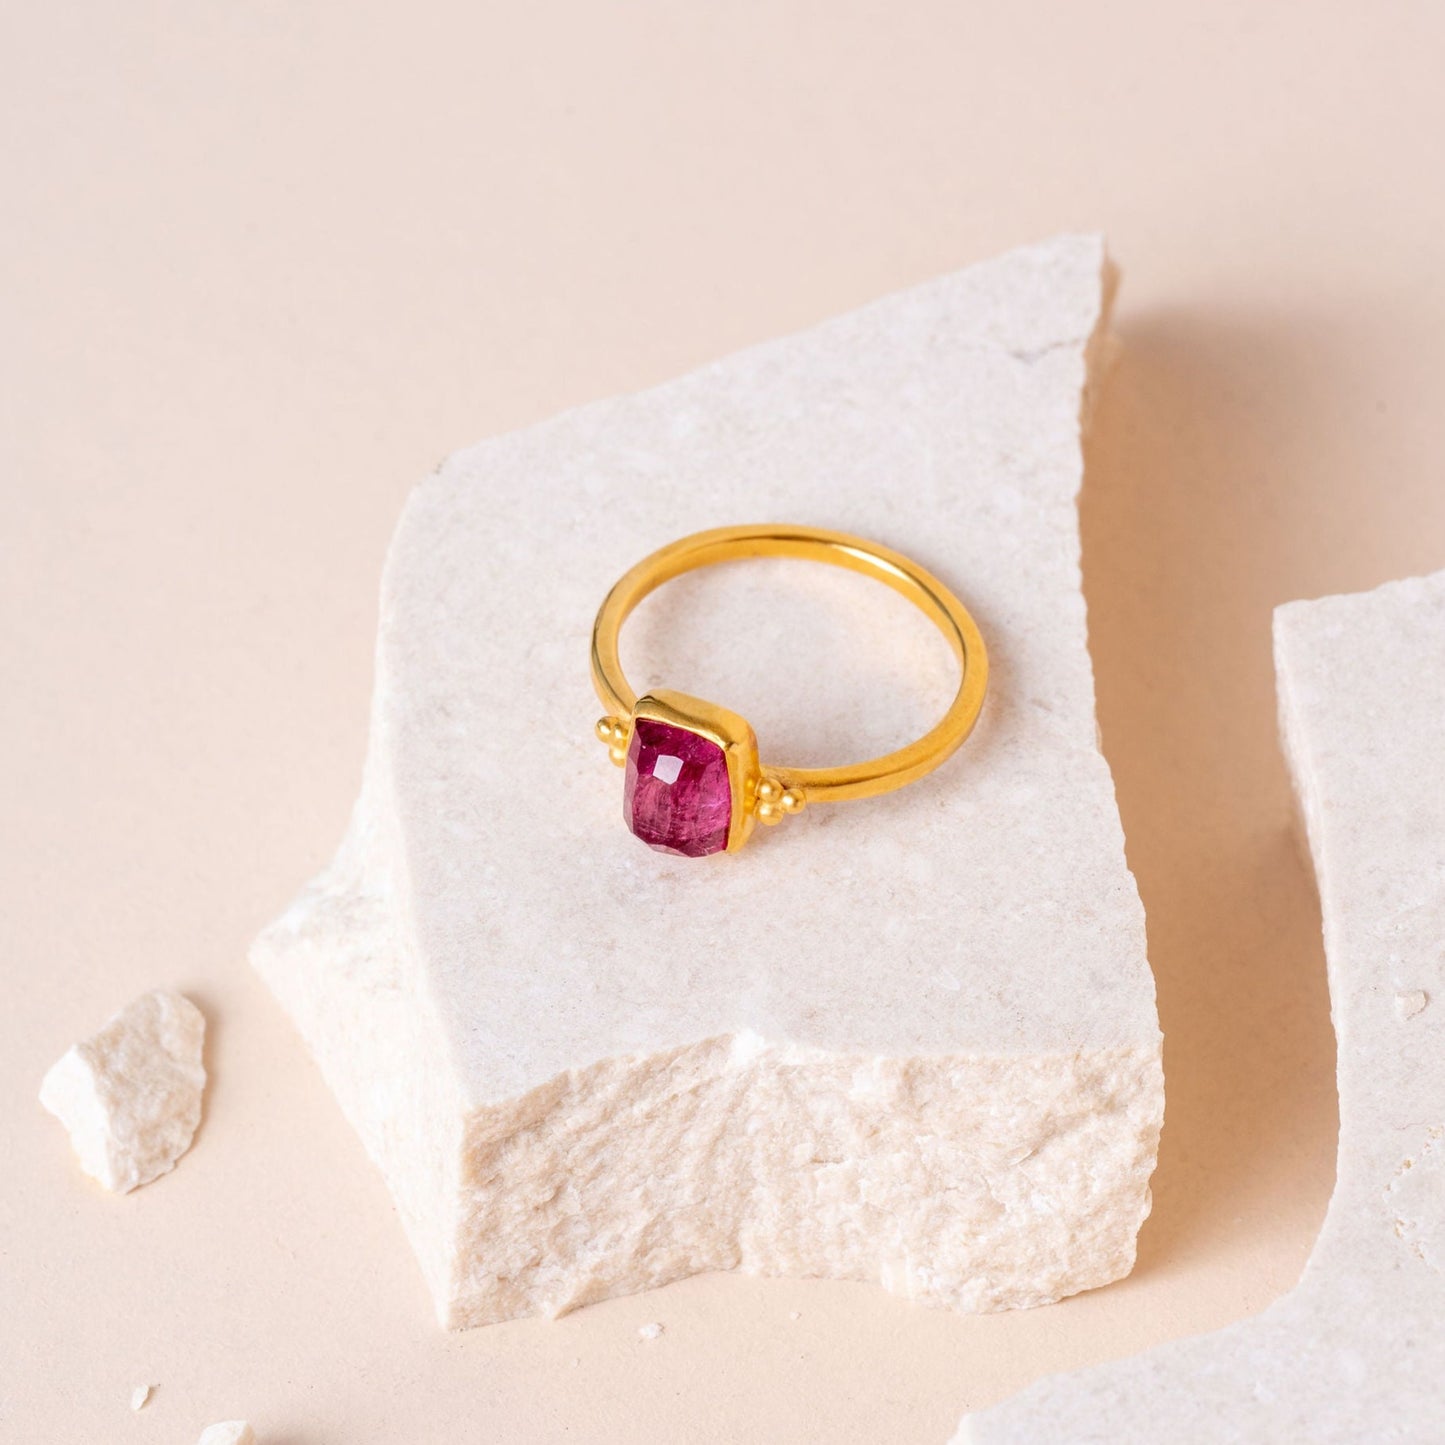 Artisan-crafted gold vermeil ring featuring a hand-cut pink tourmaline, adorned with delicate granulation detailing on each side.